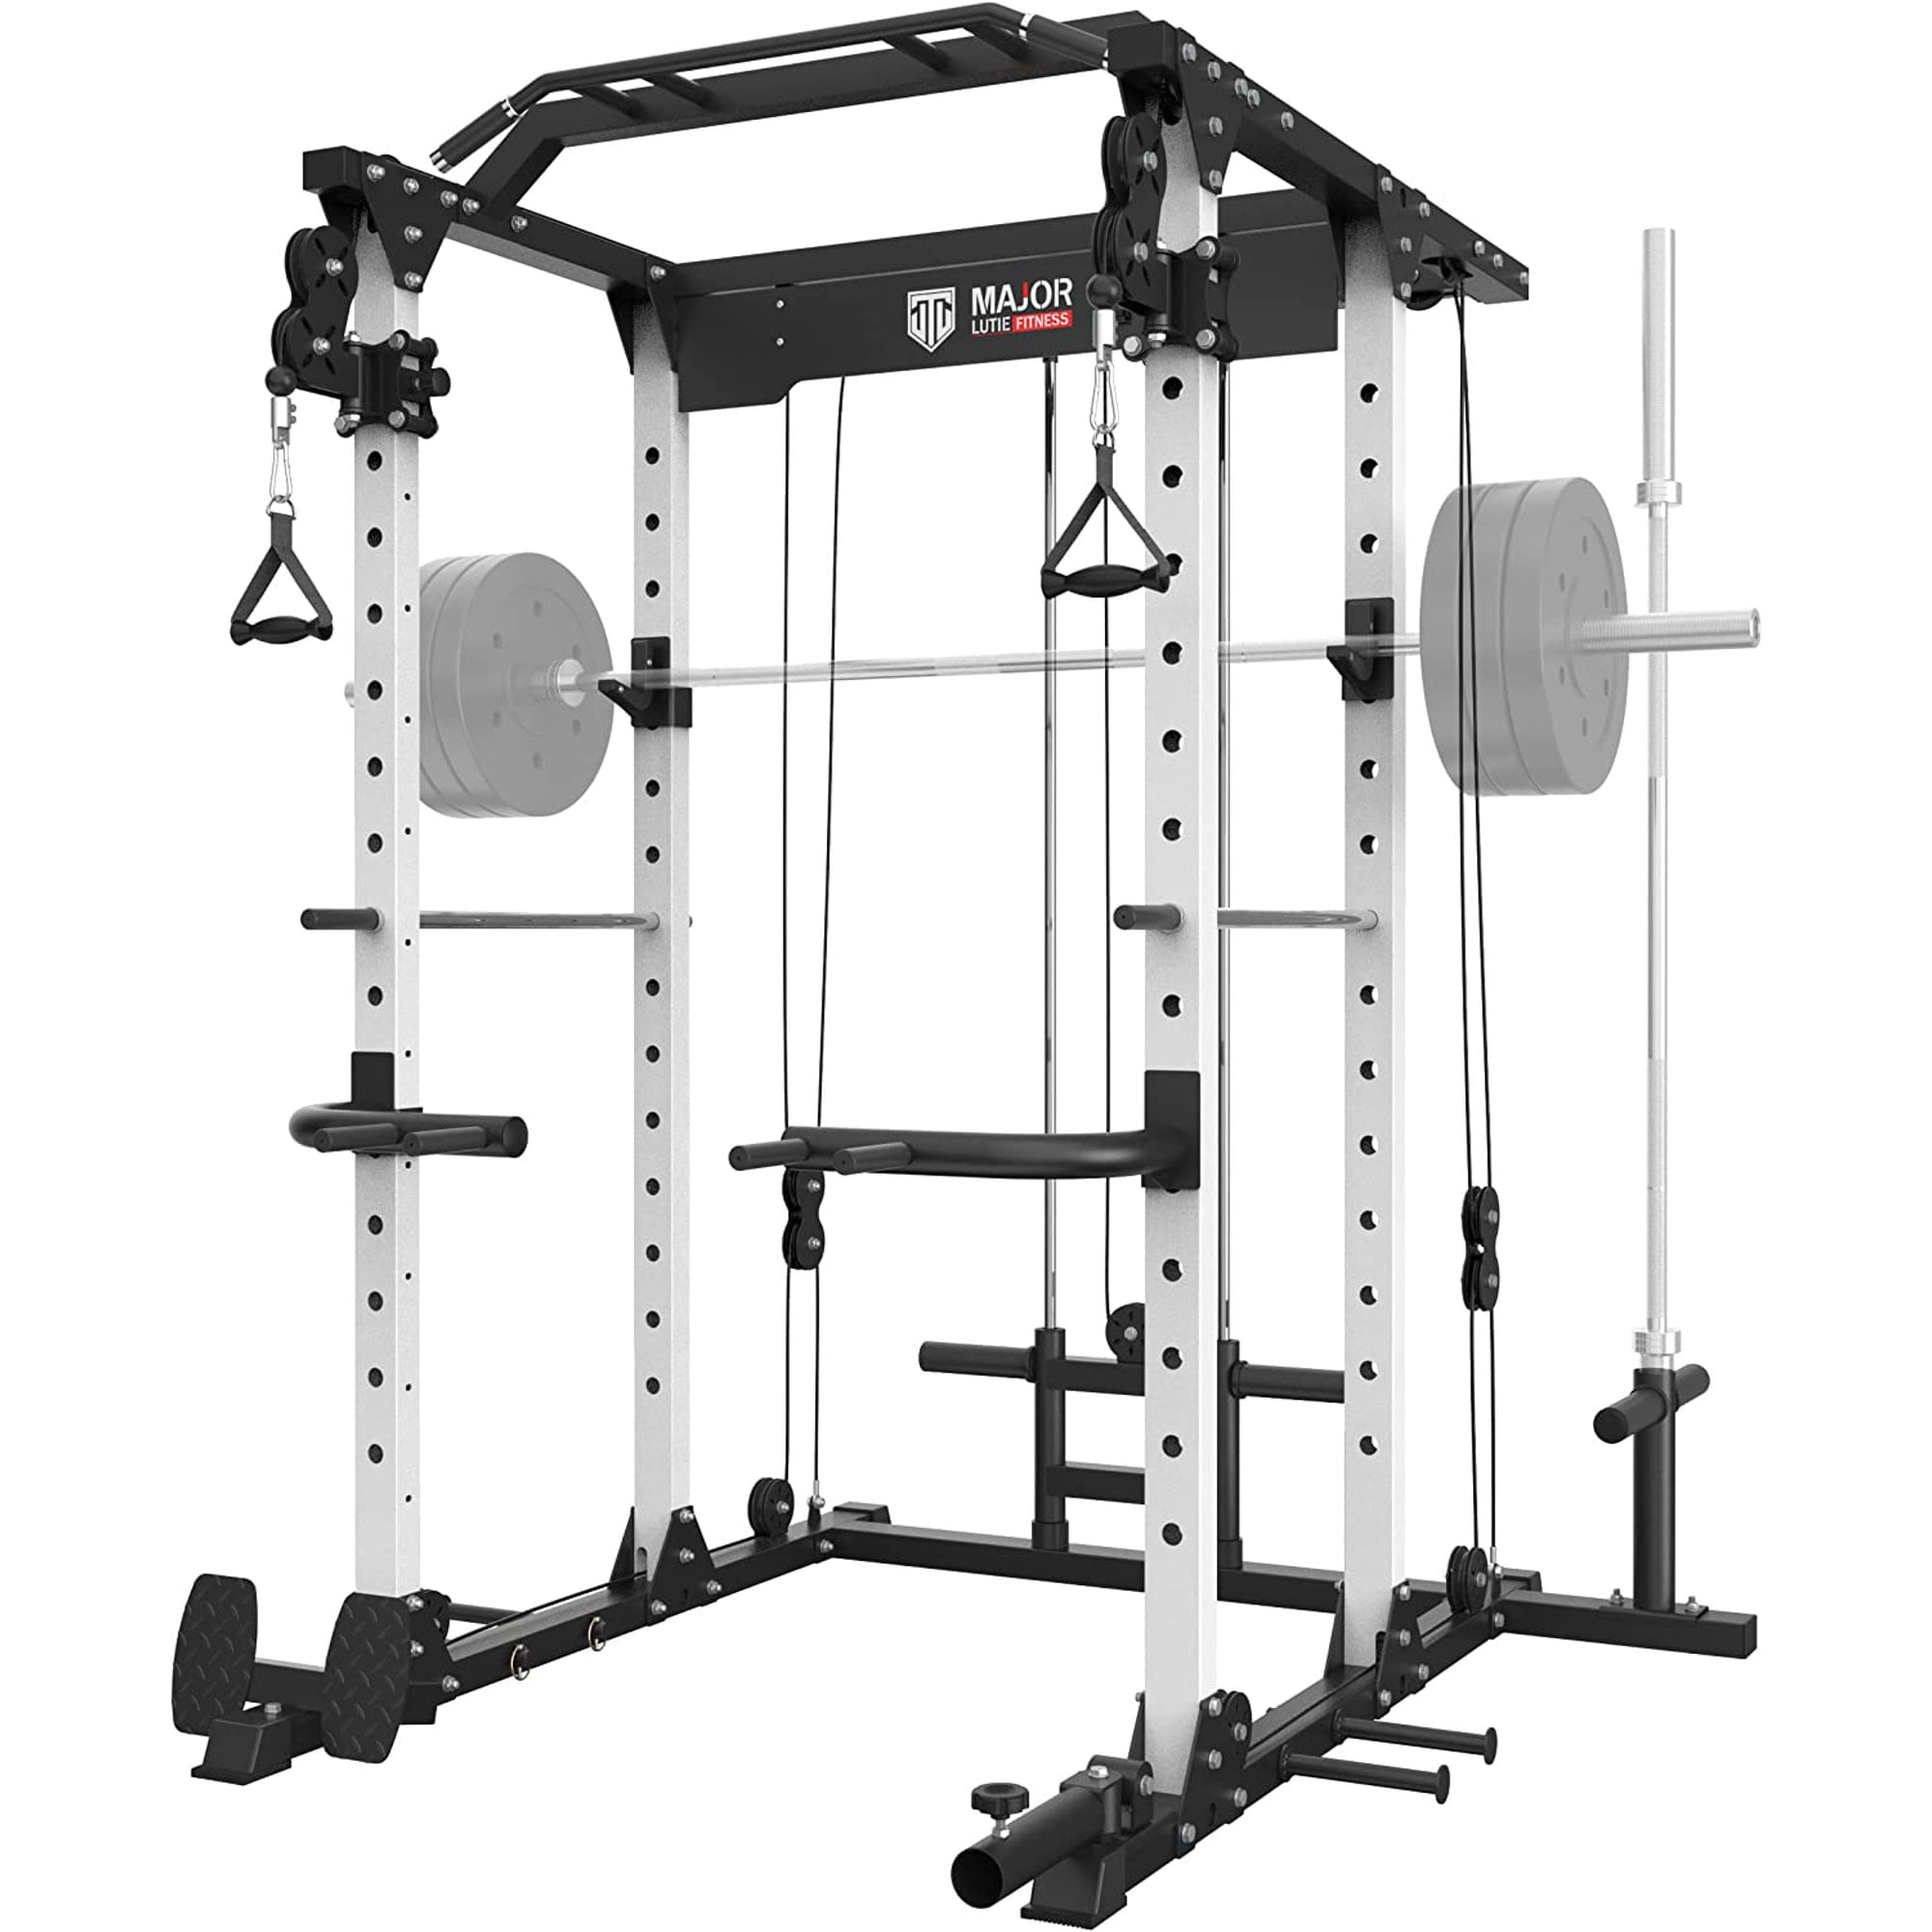 een paar wol Ontwaken KJB PLM03 Power Cage, 1400lbs Commercial Weight Power Rack with Cable  Crossover Machine and Landmine Home Gym Total Body Training(D974,504,  Patent URL: http://www.kycai.cn/xavork/index.html） - Walmart.com